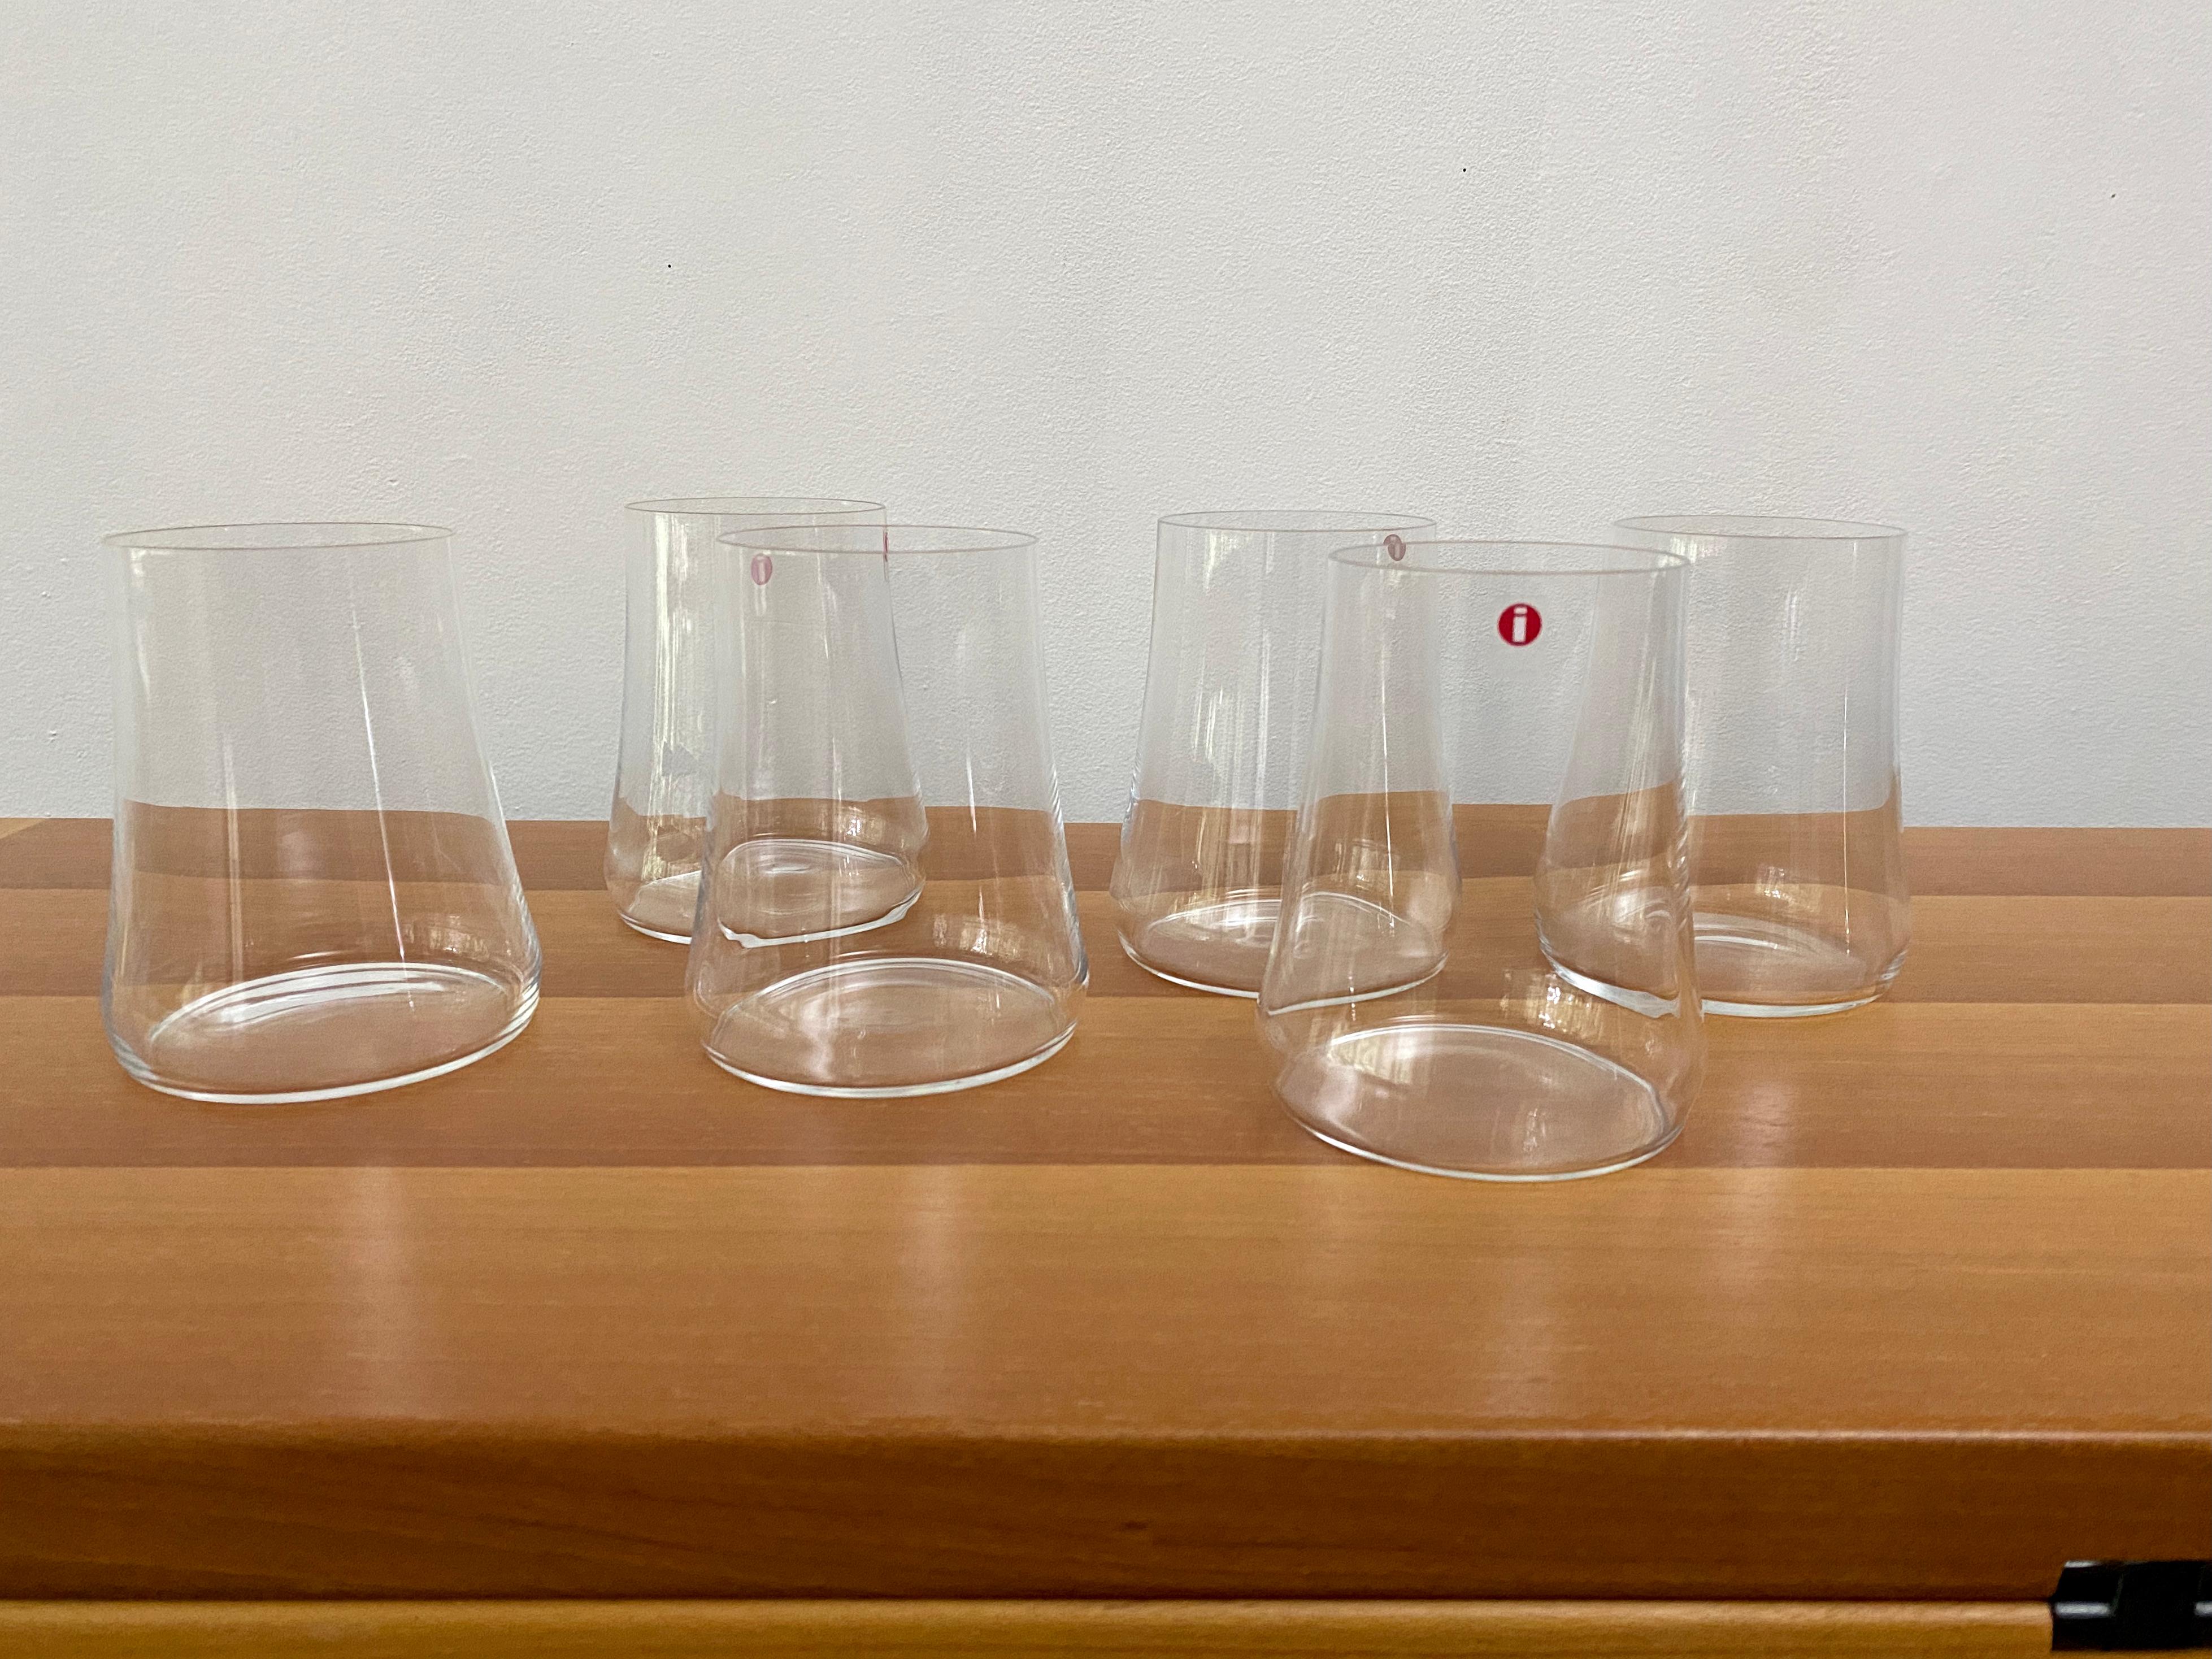 Six highball glasses designed by Marc Newson for iittala in 1998 and made in Finland. The glasses are rare and have been out of production for awhile now. Statement from the Marc Newson website: 